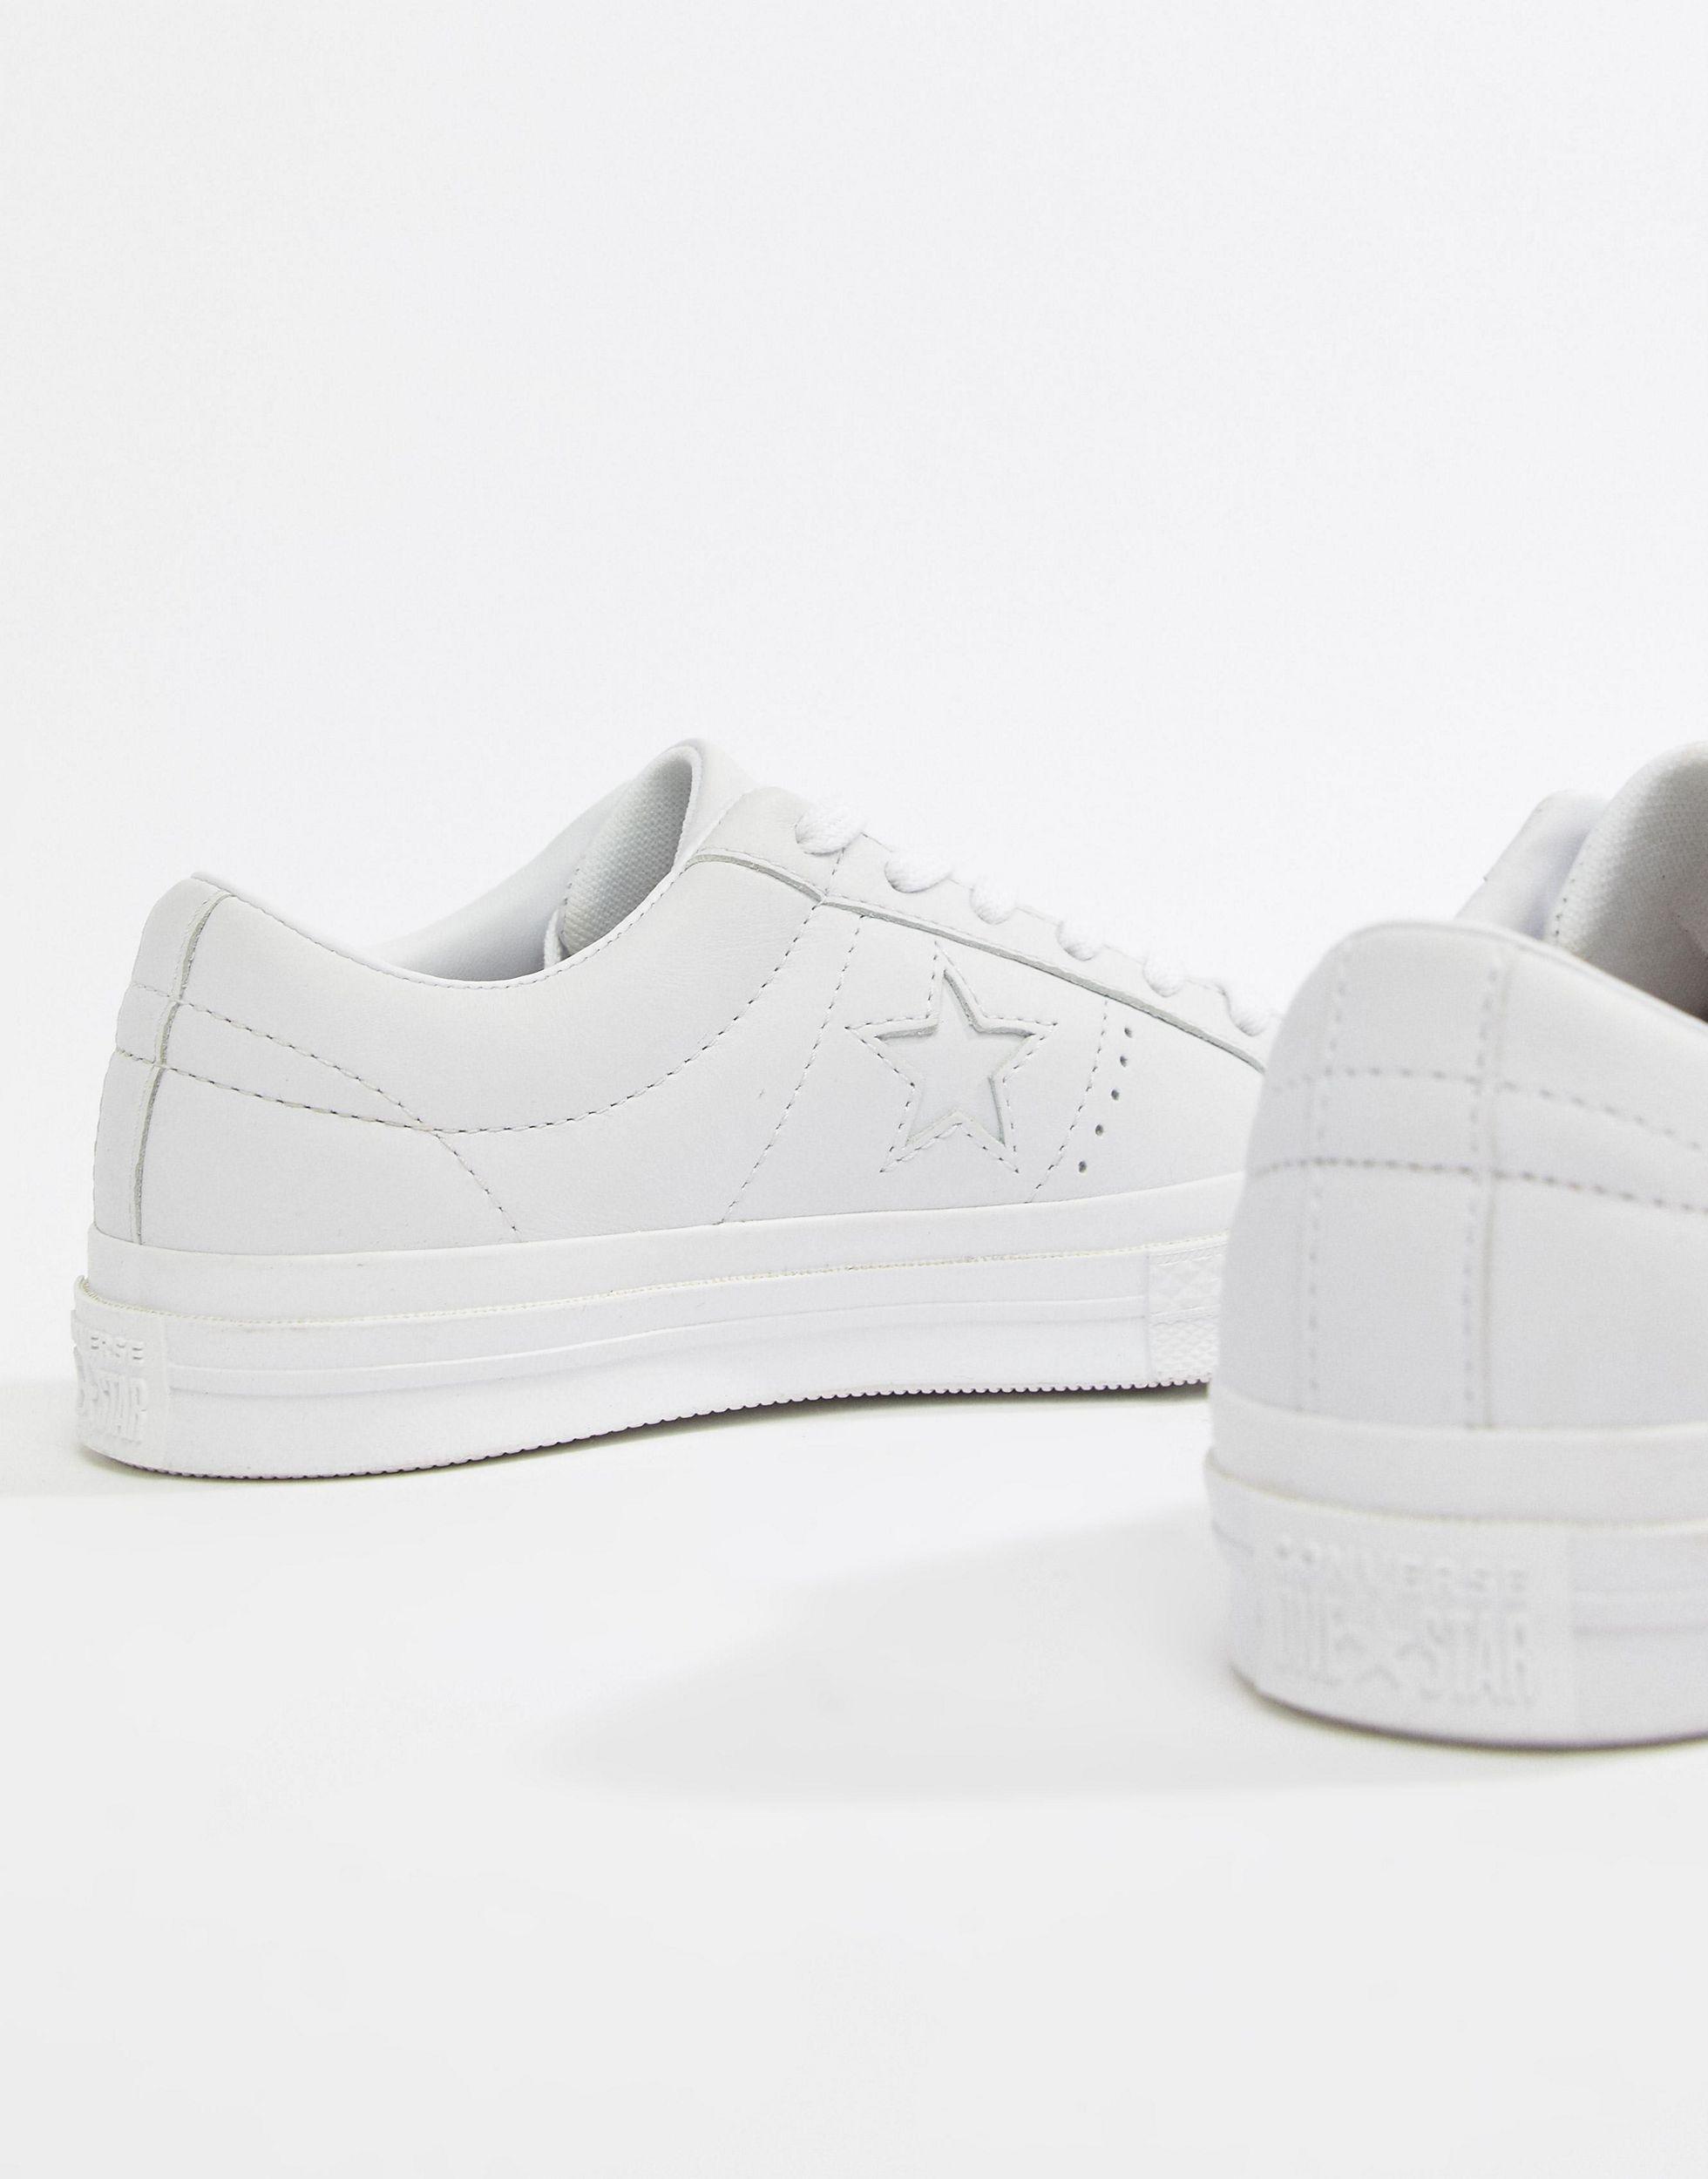 converse one star leather low top white